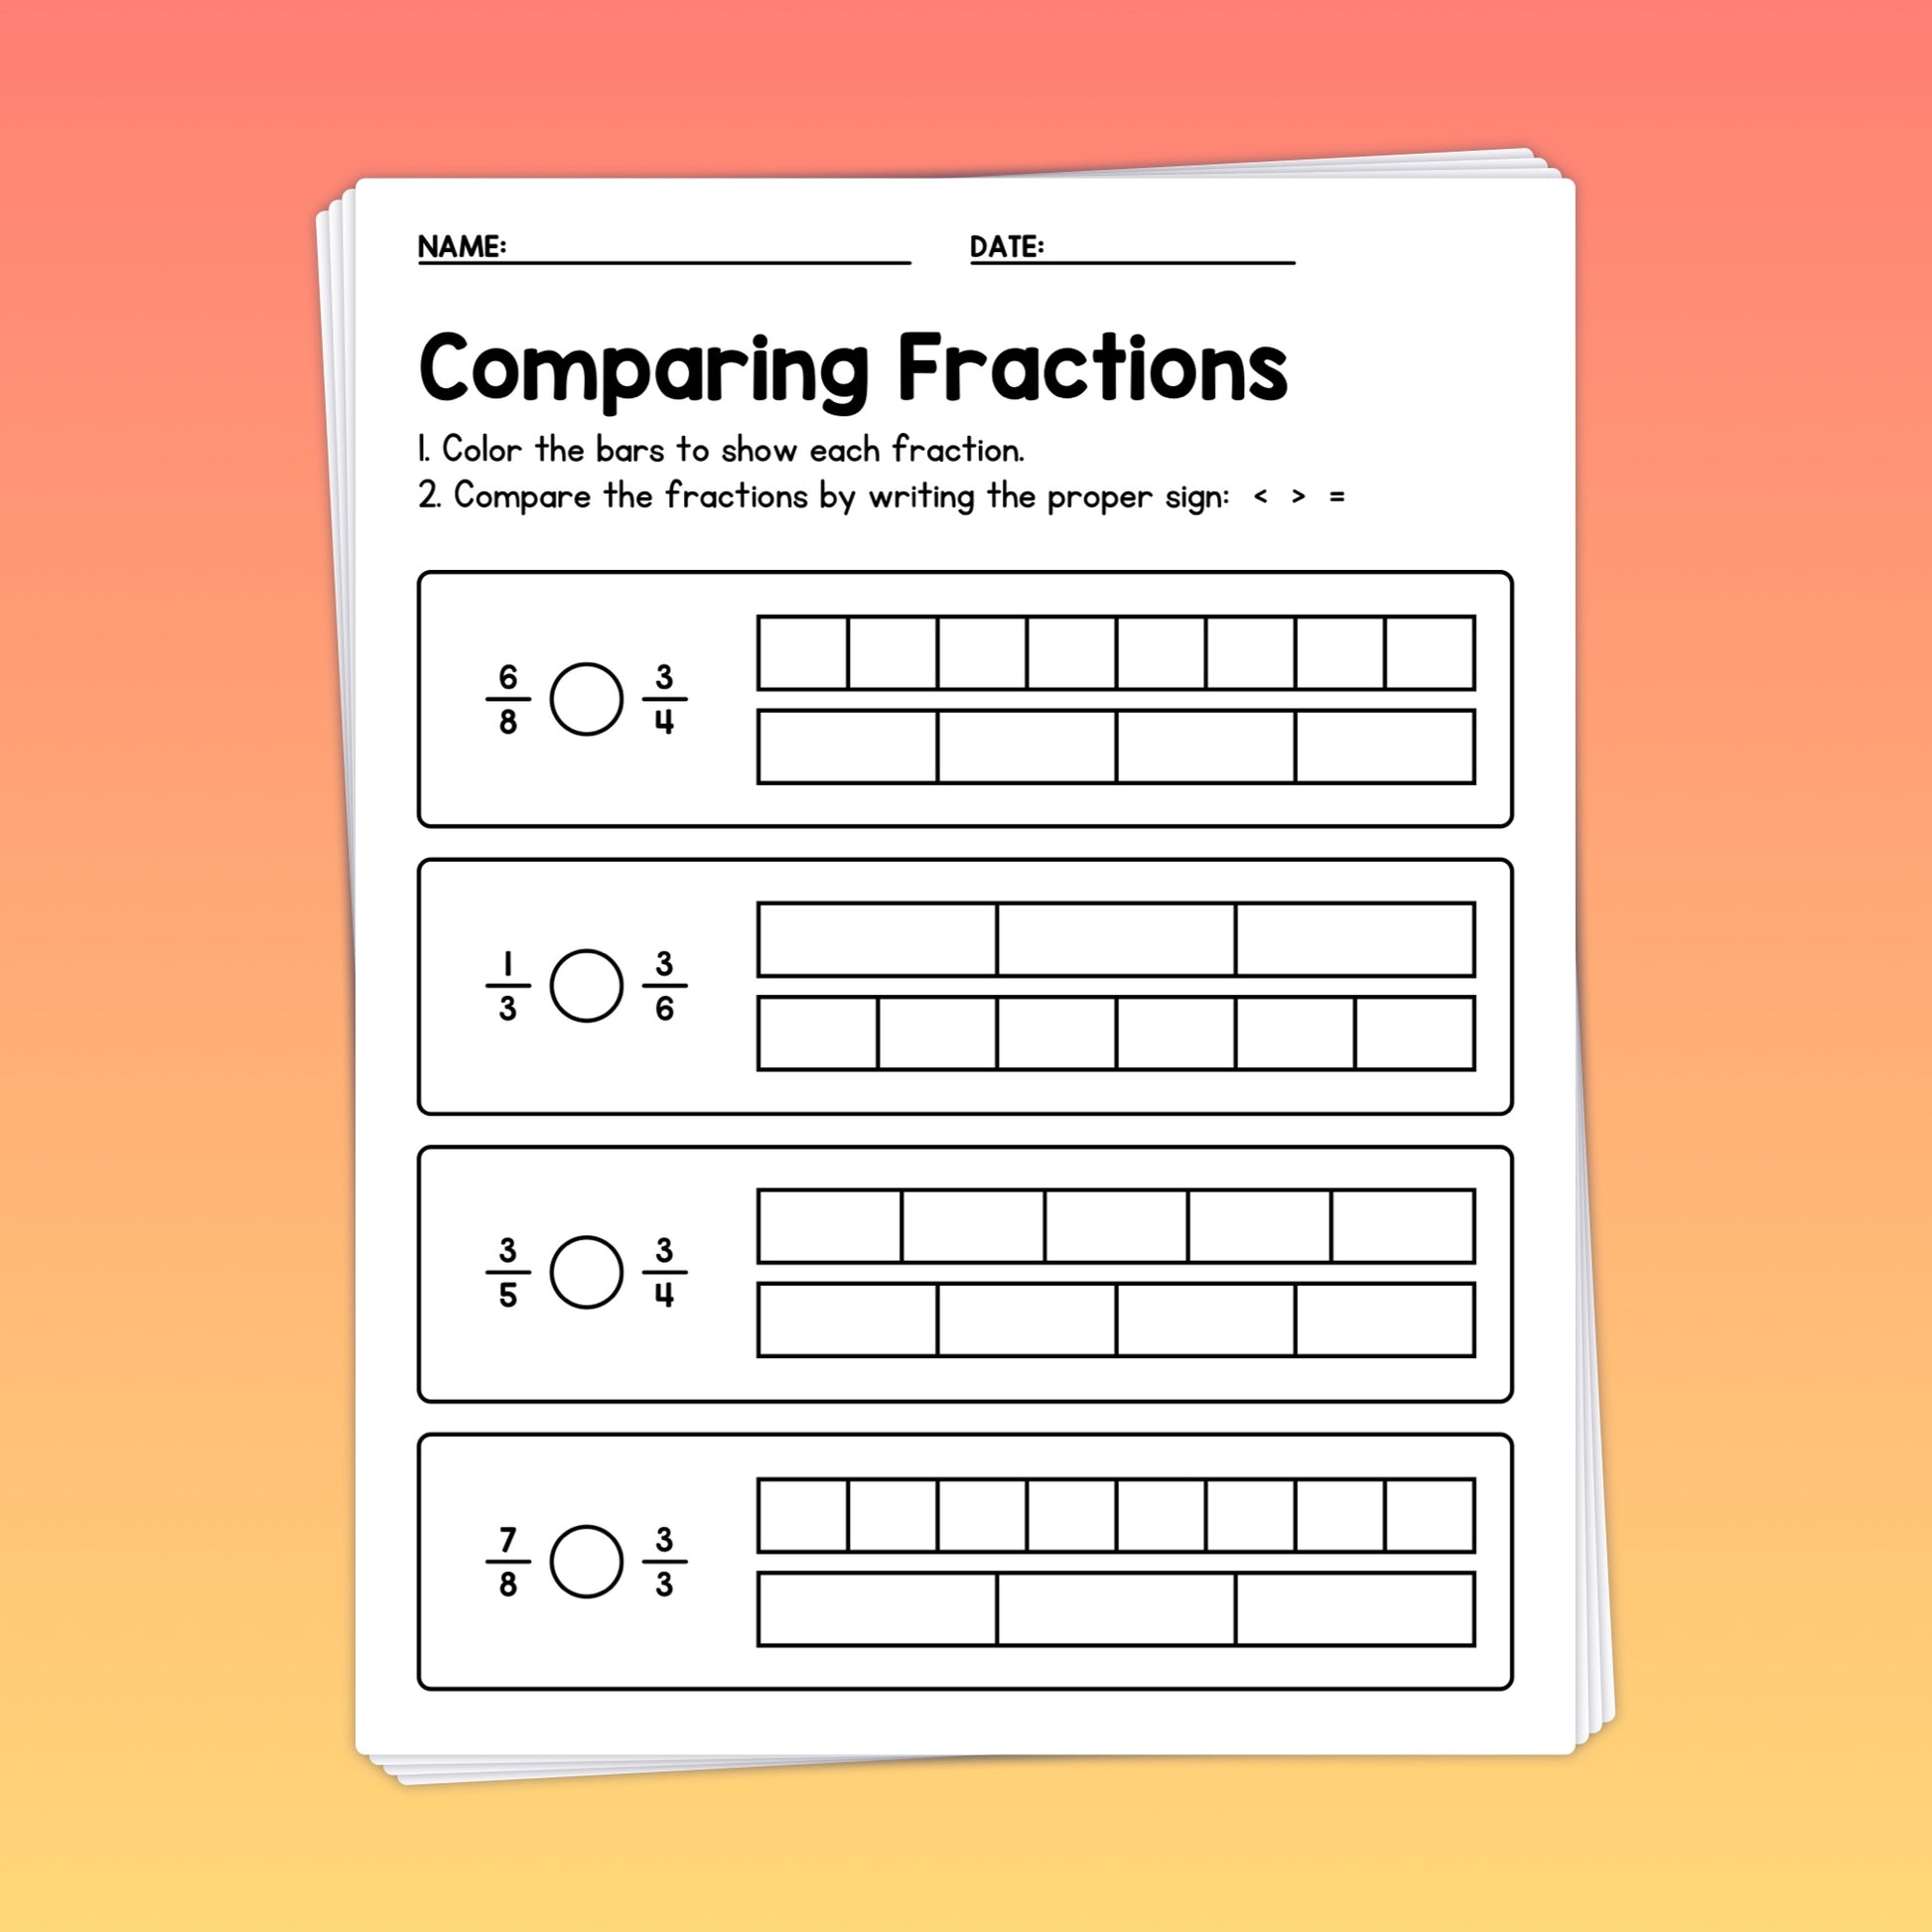 Comparing fractions printable